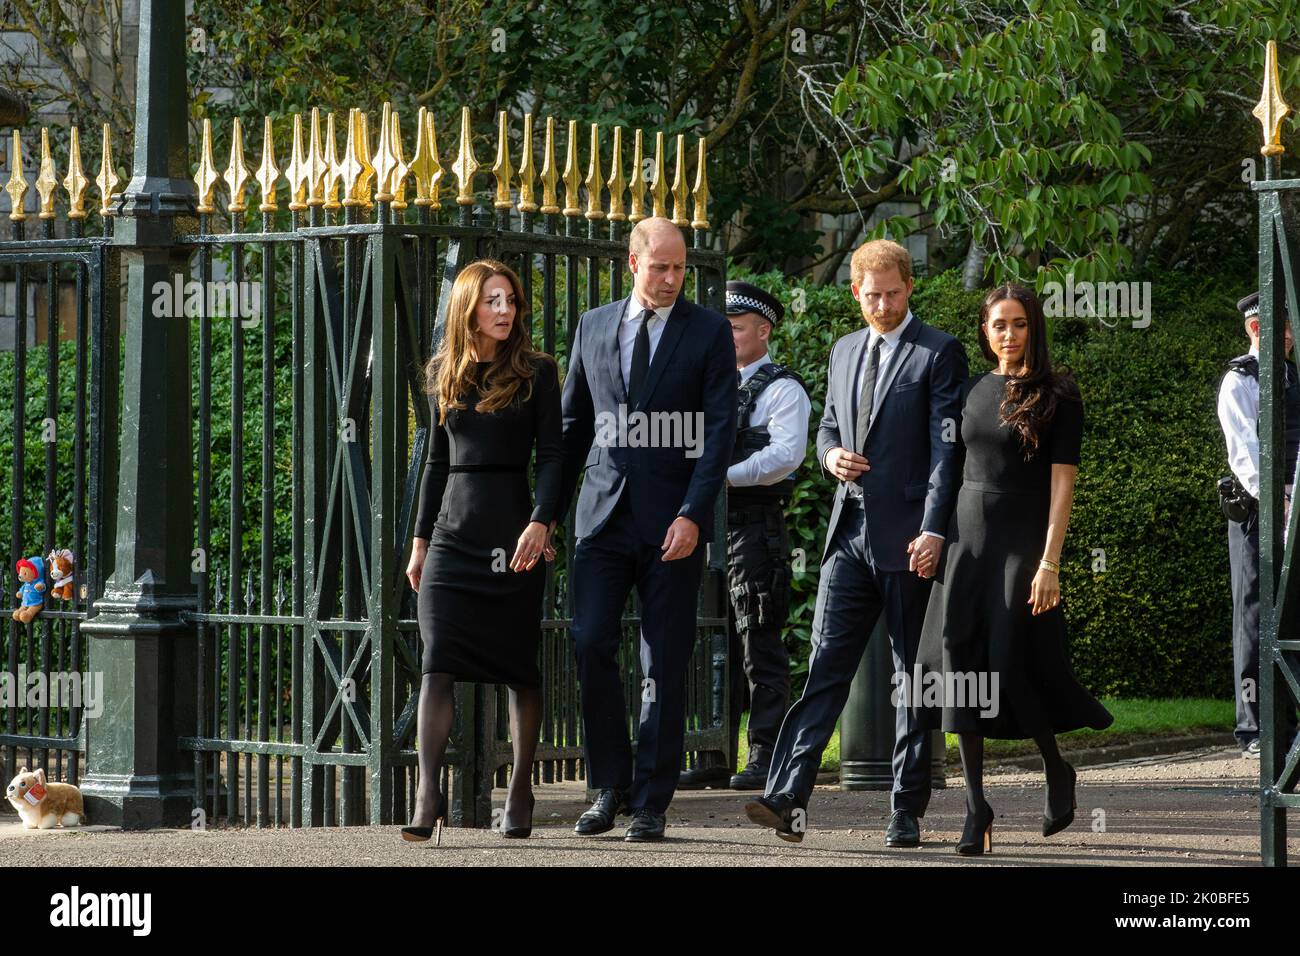 Windsor, UK. 10th September, 2022. Prince William and Catherine, the new Prince and Princess of Wales, accompanied by Prince Harry and Meghan, the Duke and Duchess of Sussex, arrive to view floral tributes laid outside Cambridge Gate at Windsor Castle following the death of Queen Elizabeth II. Queen Elizabeth II, the UK's longest-serving monarch, died at Balmoral aged 96 on 8th September 2022 after a reign lasting 70 years. Credit: Mark Kerrison/Alamy Live News Stock Photo